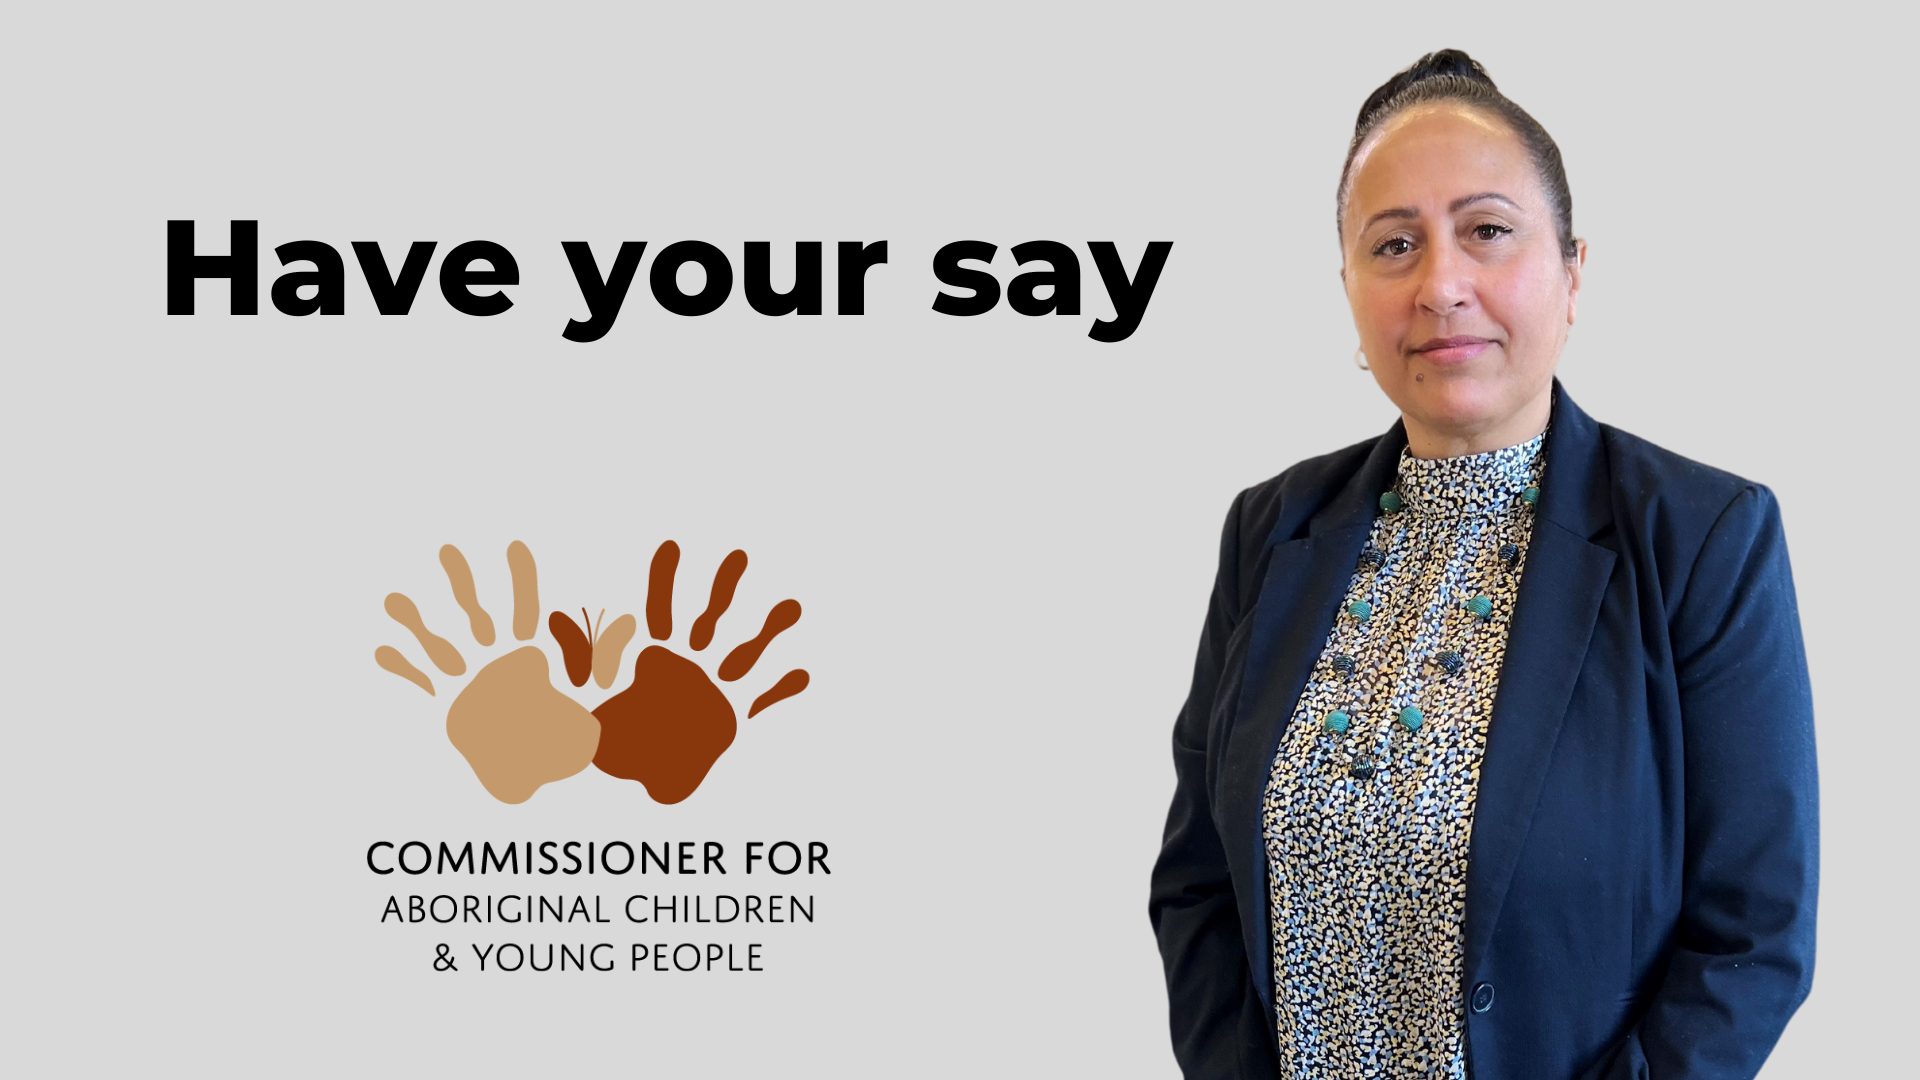 Have your say -April Lawrie Commissioner for Aboriginal Children and Young People